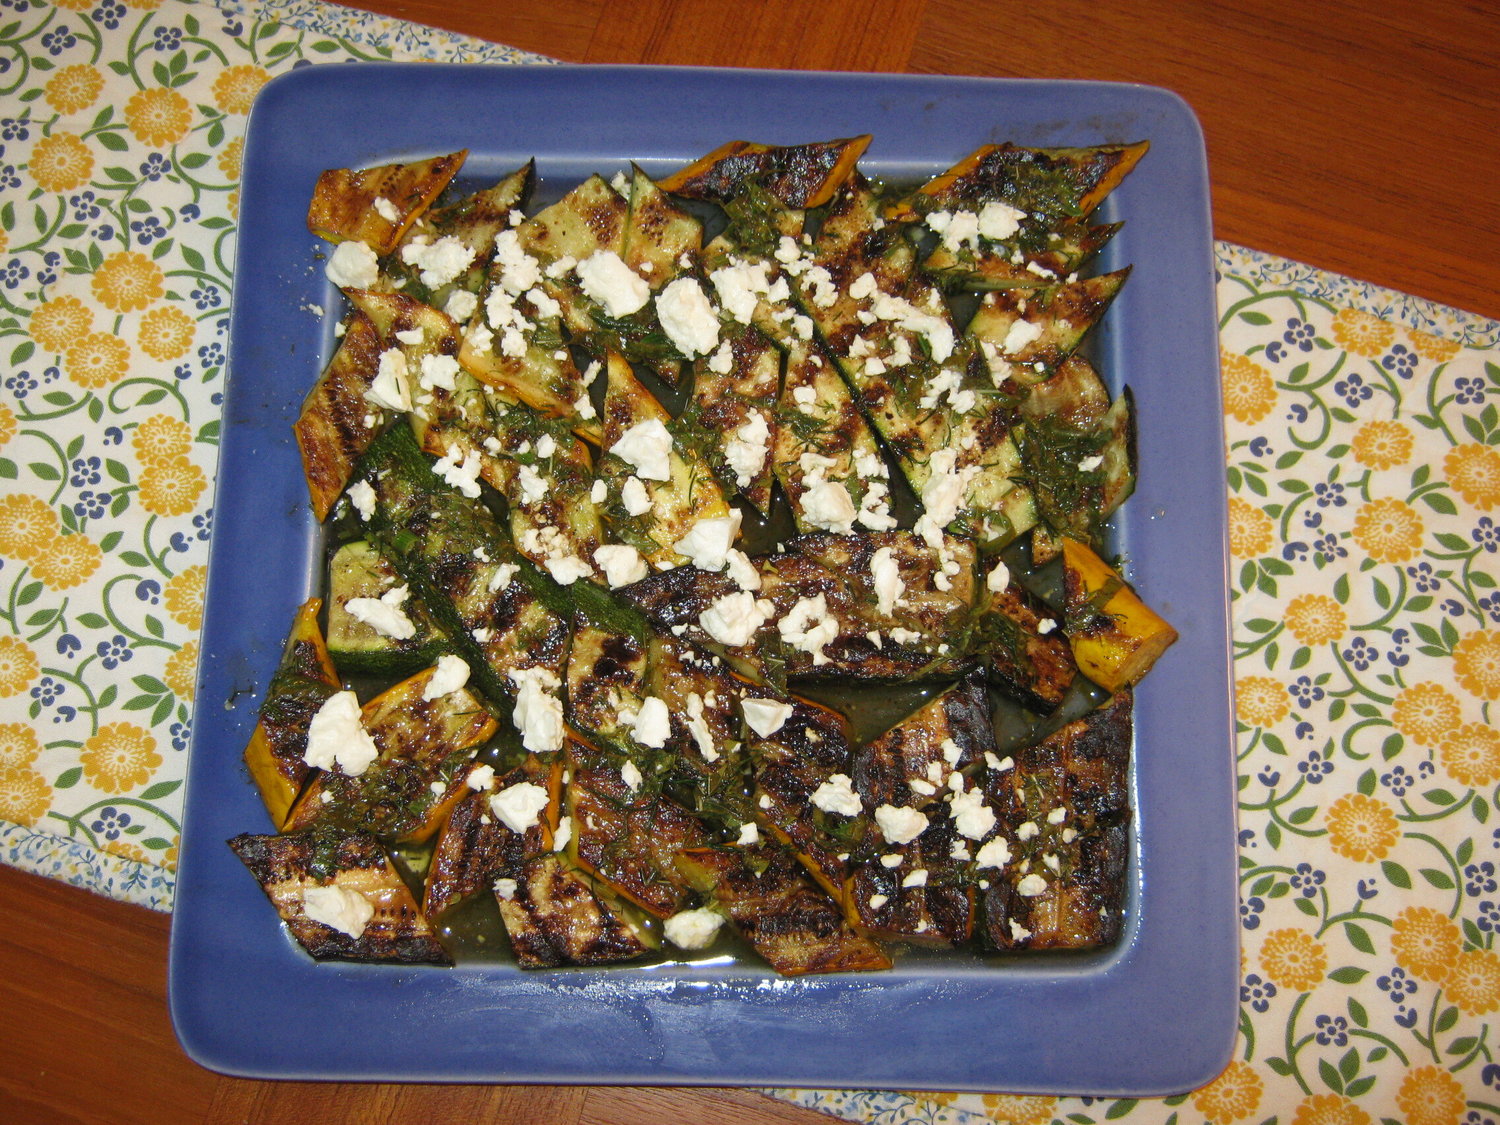 Grilled zucchini with feta.